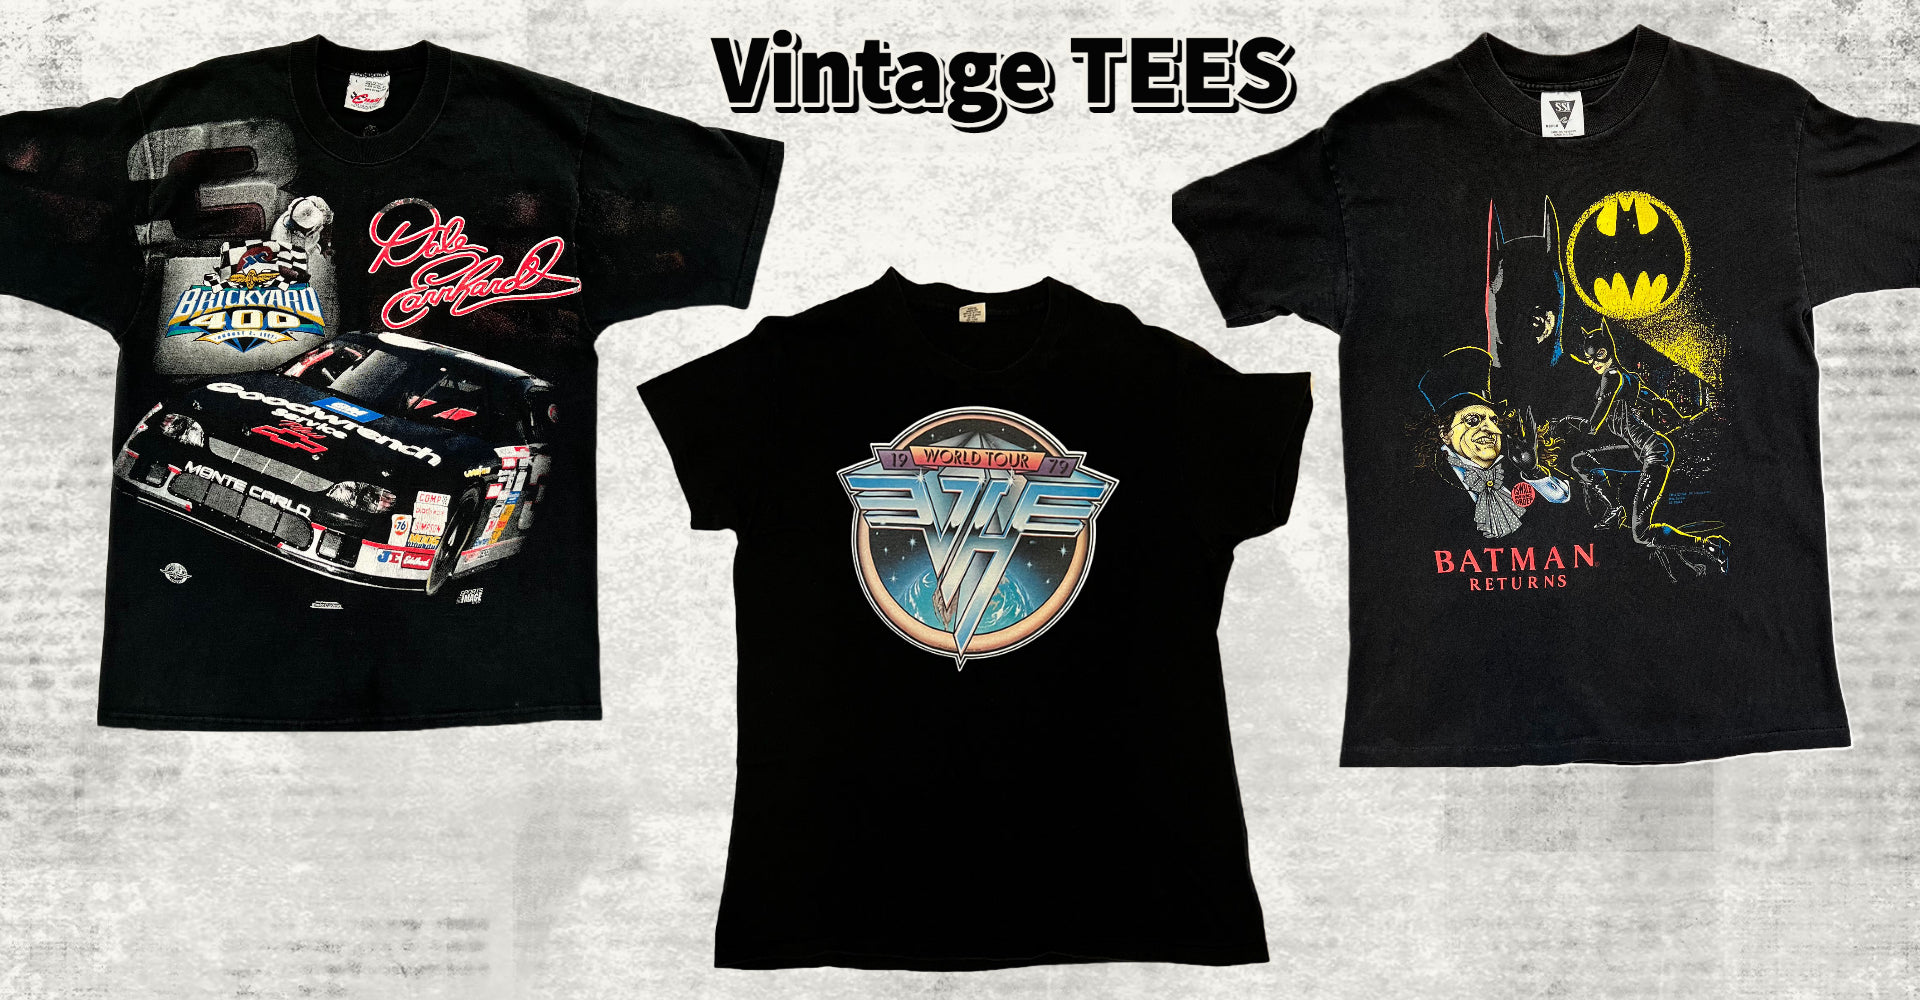 Vintage shirts for men and women. Band vintage t-shirts, movies vintage t-shirts sports t-shirts and graphic tees for all to shop